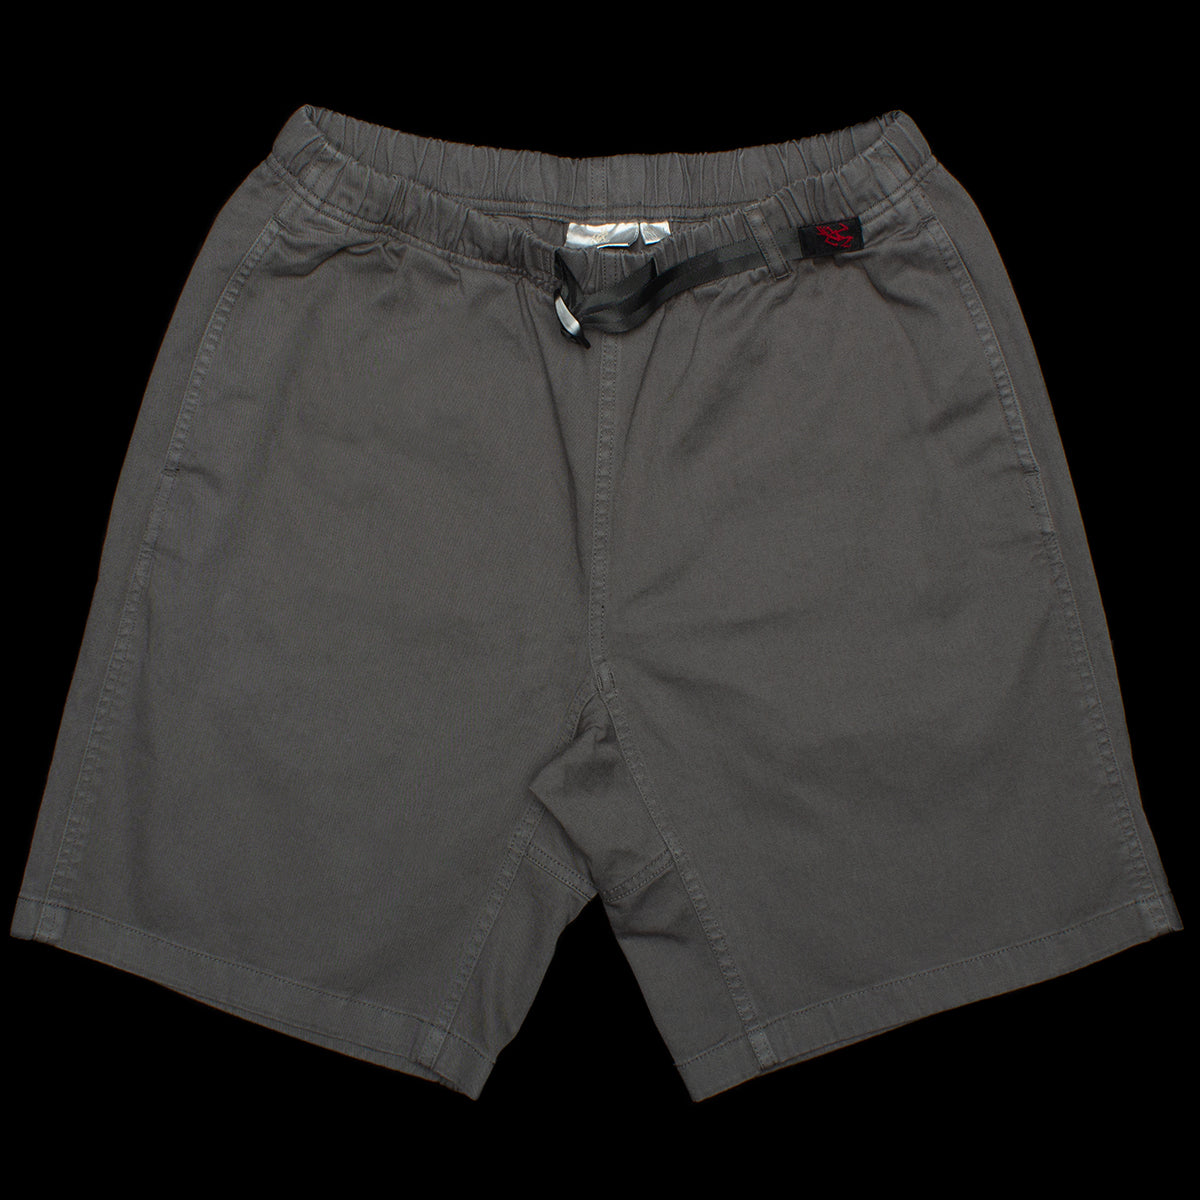 Gramicci G-Short Style # G101-OGT Color : Charcoal